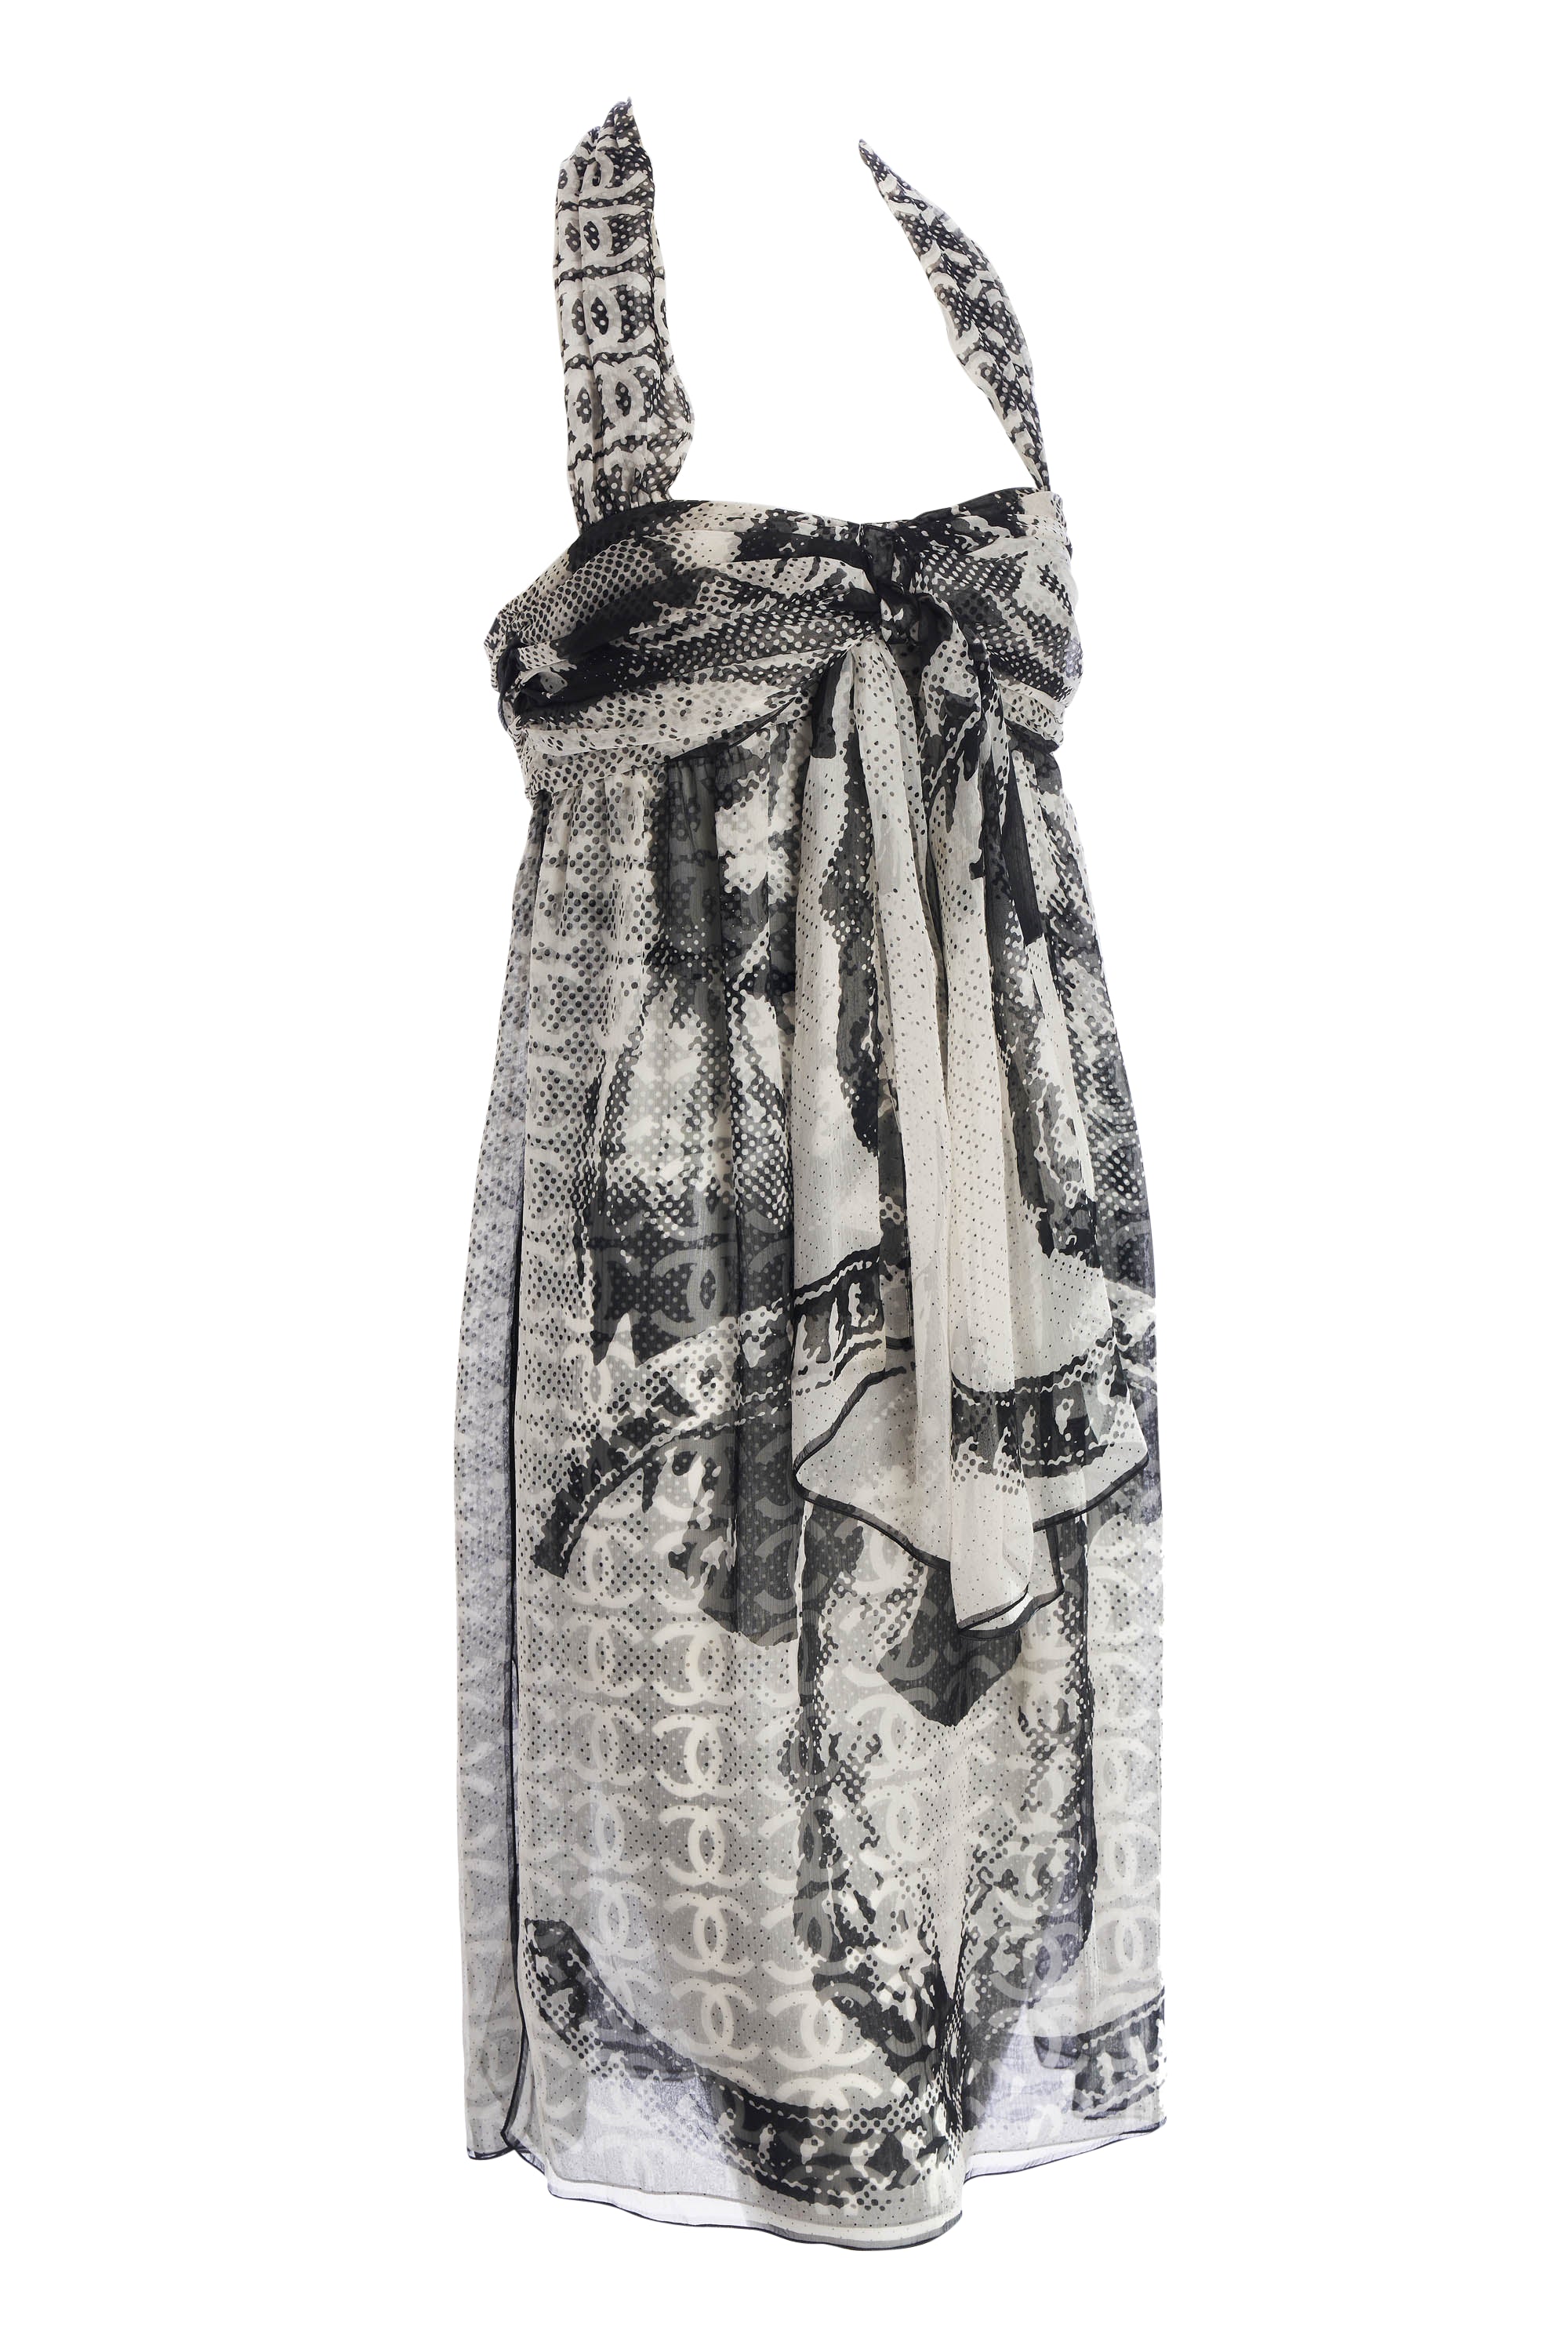 Chanel Printed Black and White Lion Dress 2010C